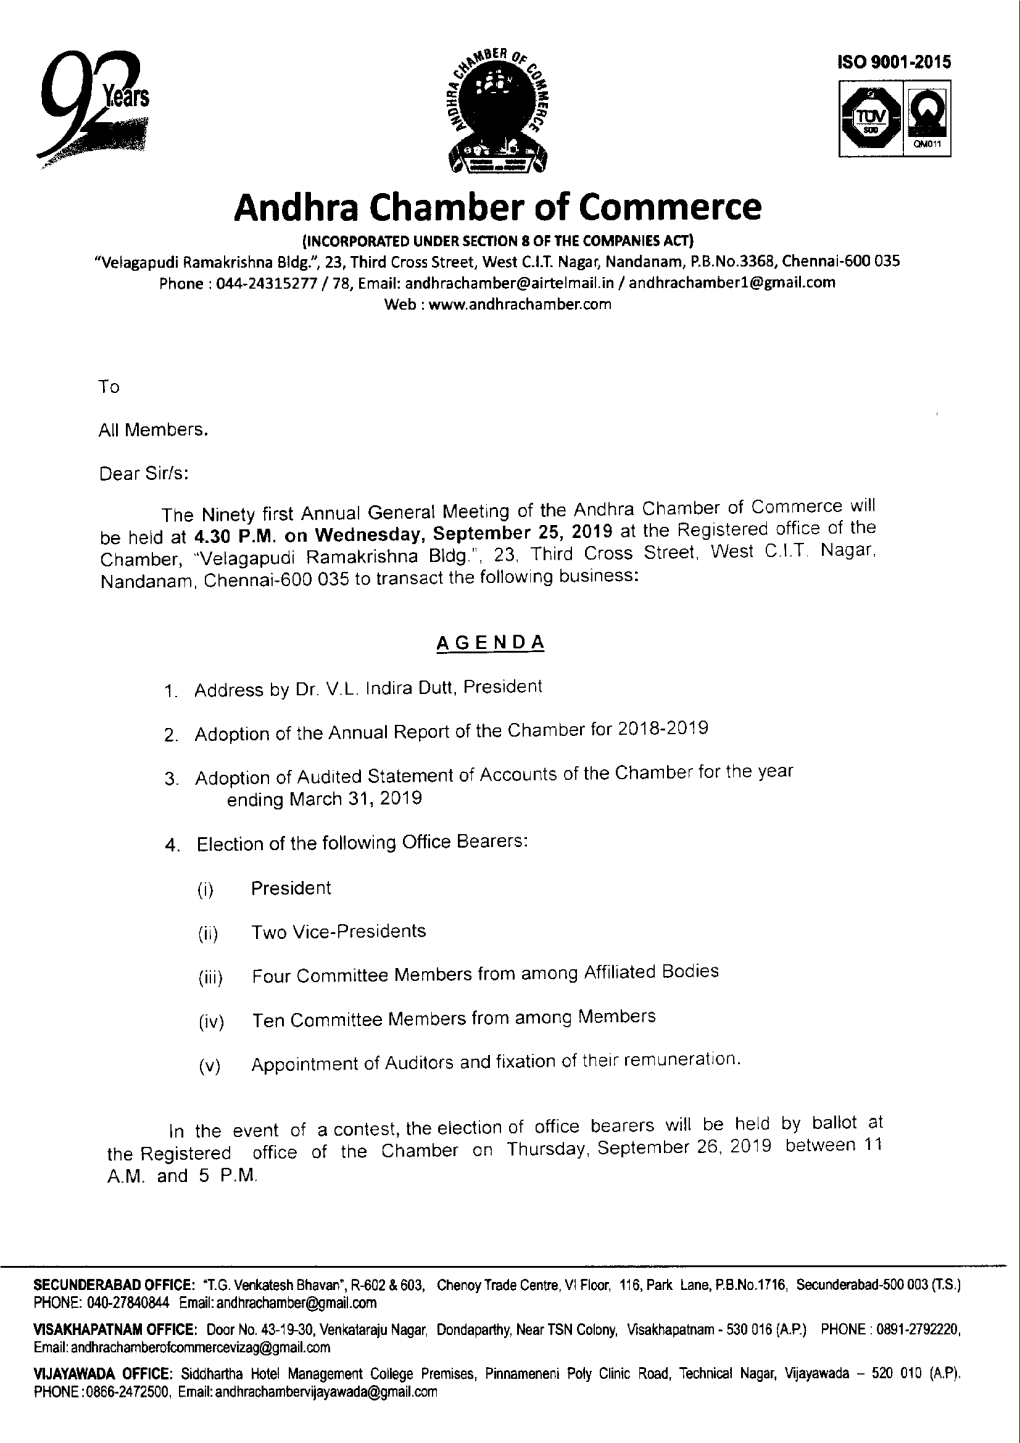 Andhra Chamber of Commerce (INCORPORATED UNDER SECTION 8 of the COMPANIES ACT) "Velagapudi Ramakrishna Bldg.", 23, Third Cross Street, West C.I.T